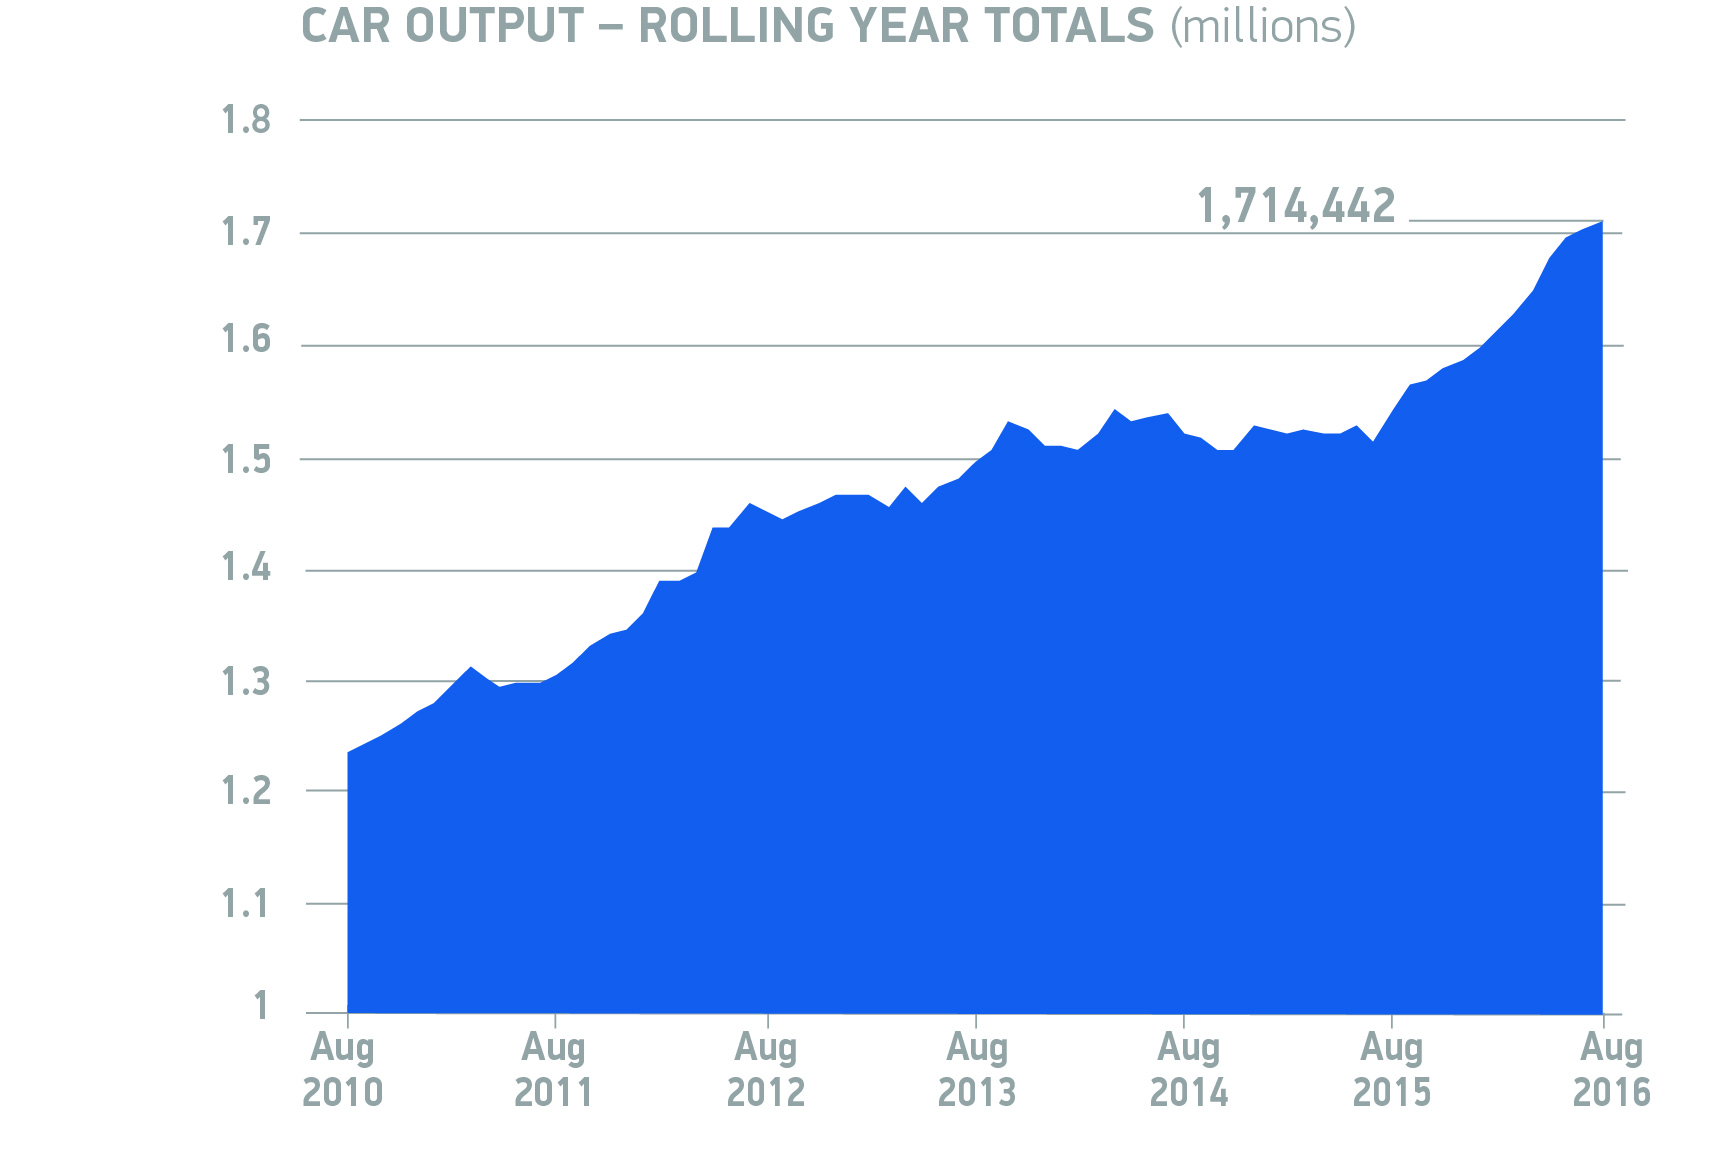 car-output_rolling-year-totals-august-2016